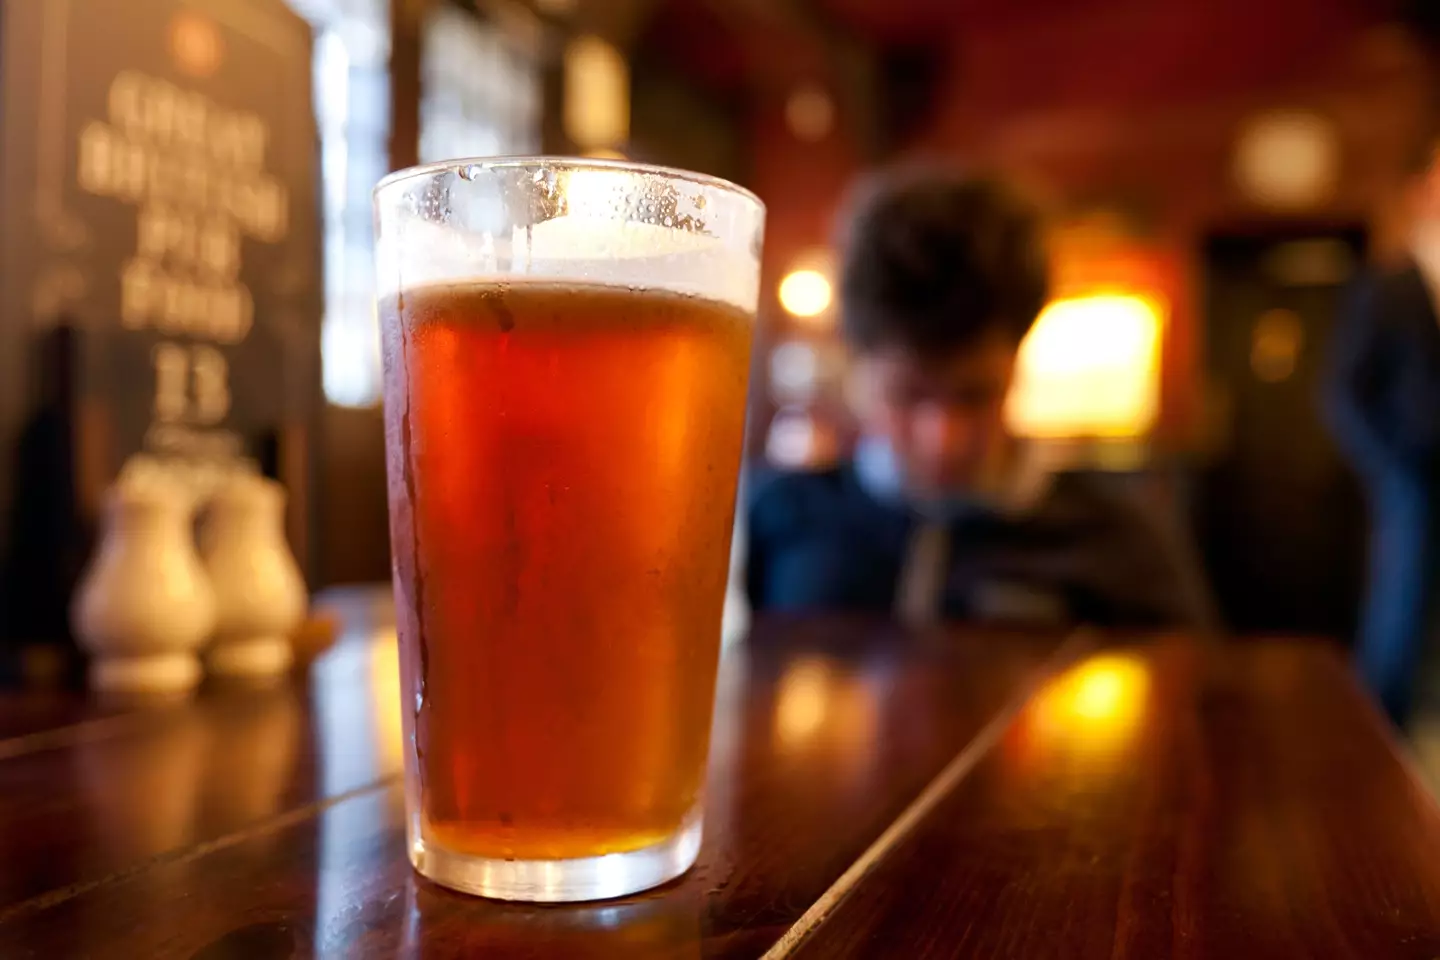 The average price of a pint of draught lager has gone down by 1p.